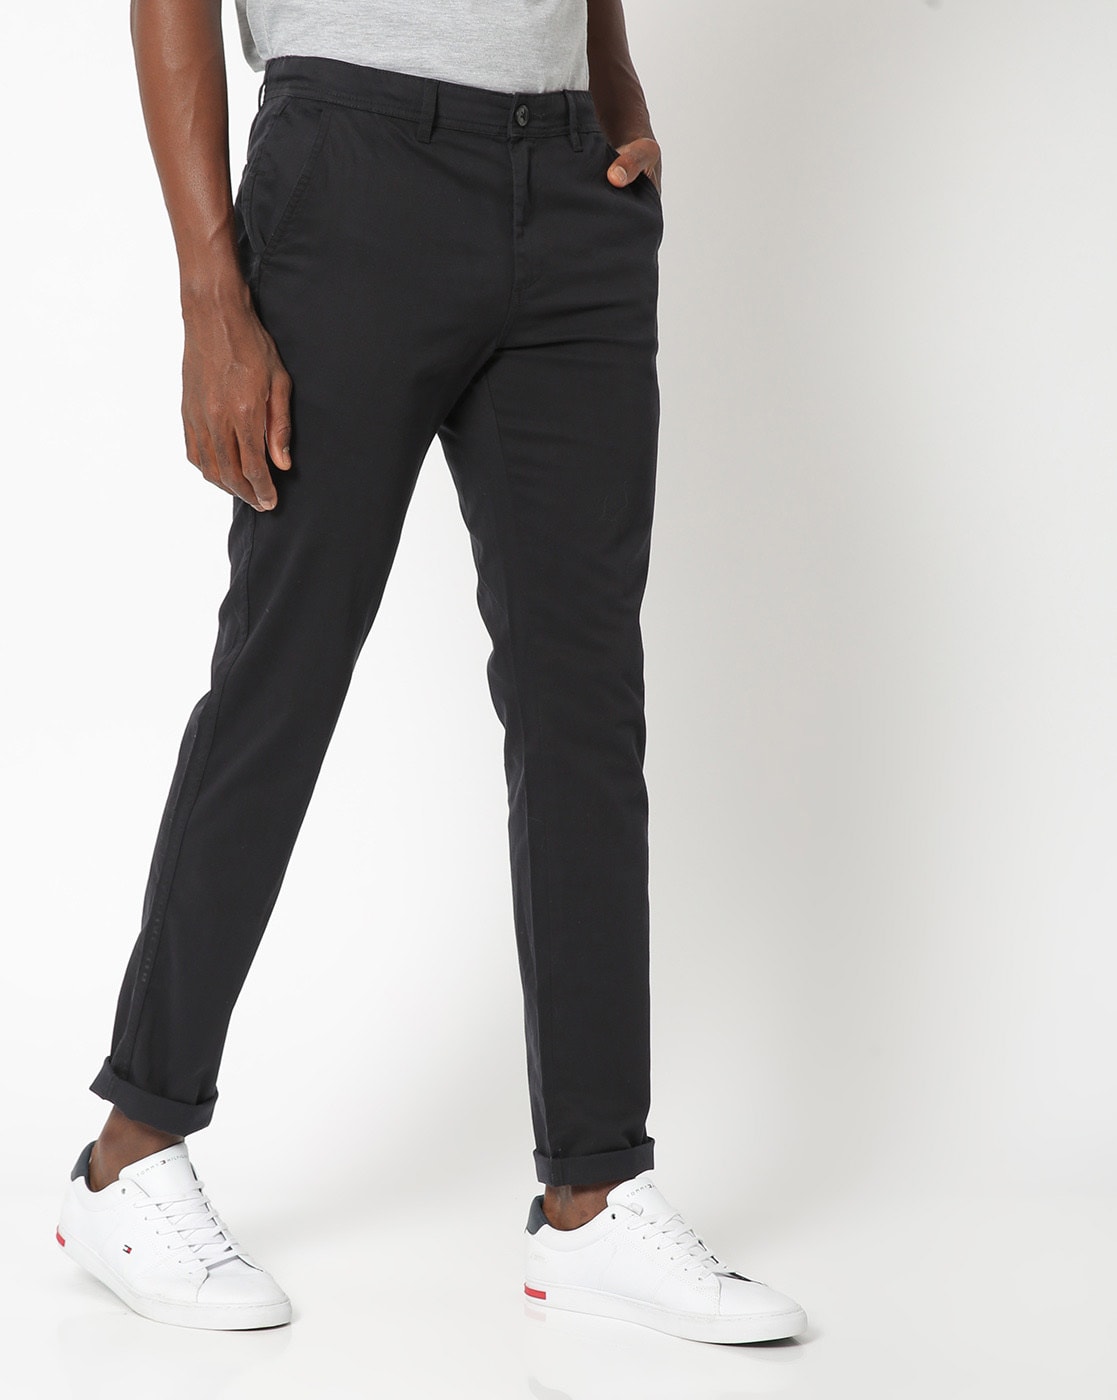 Plus Size Chino Trousers  Cheap Chinos in Sizes 1432  bonprix